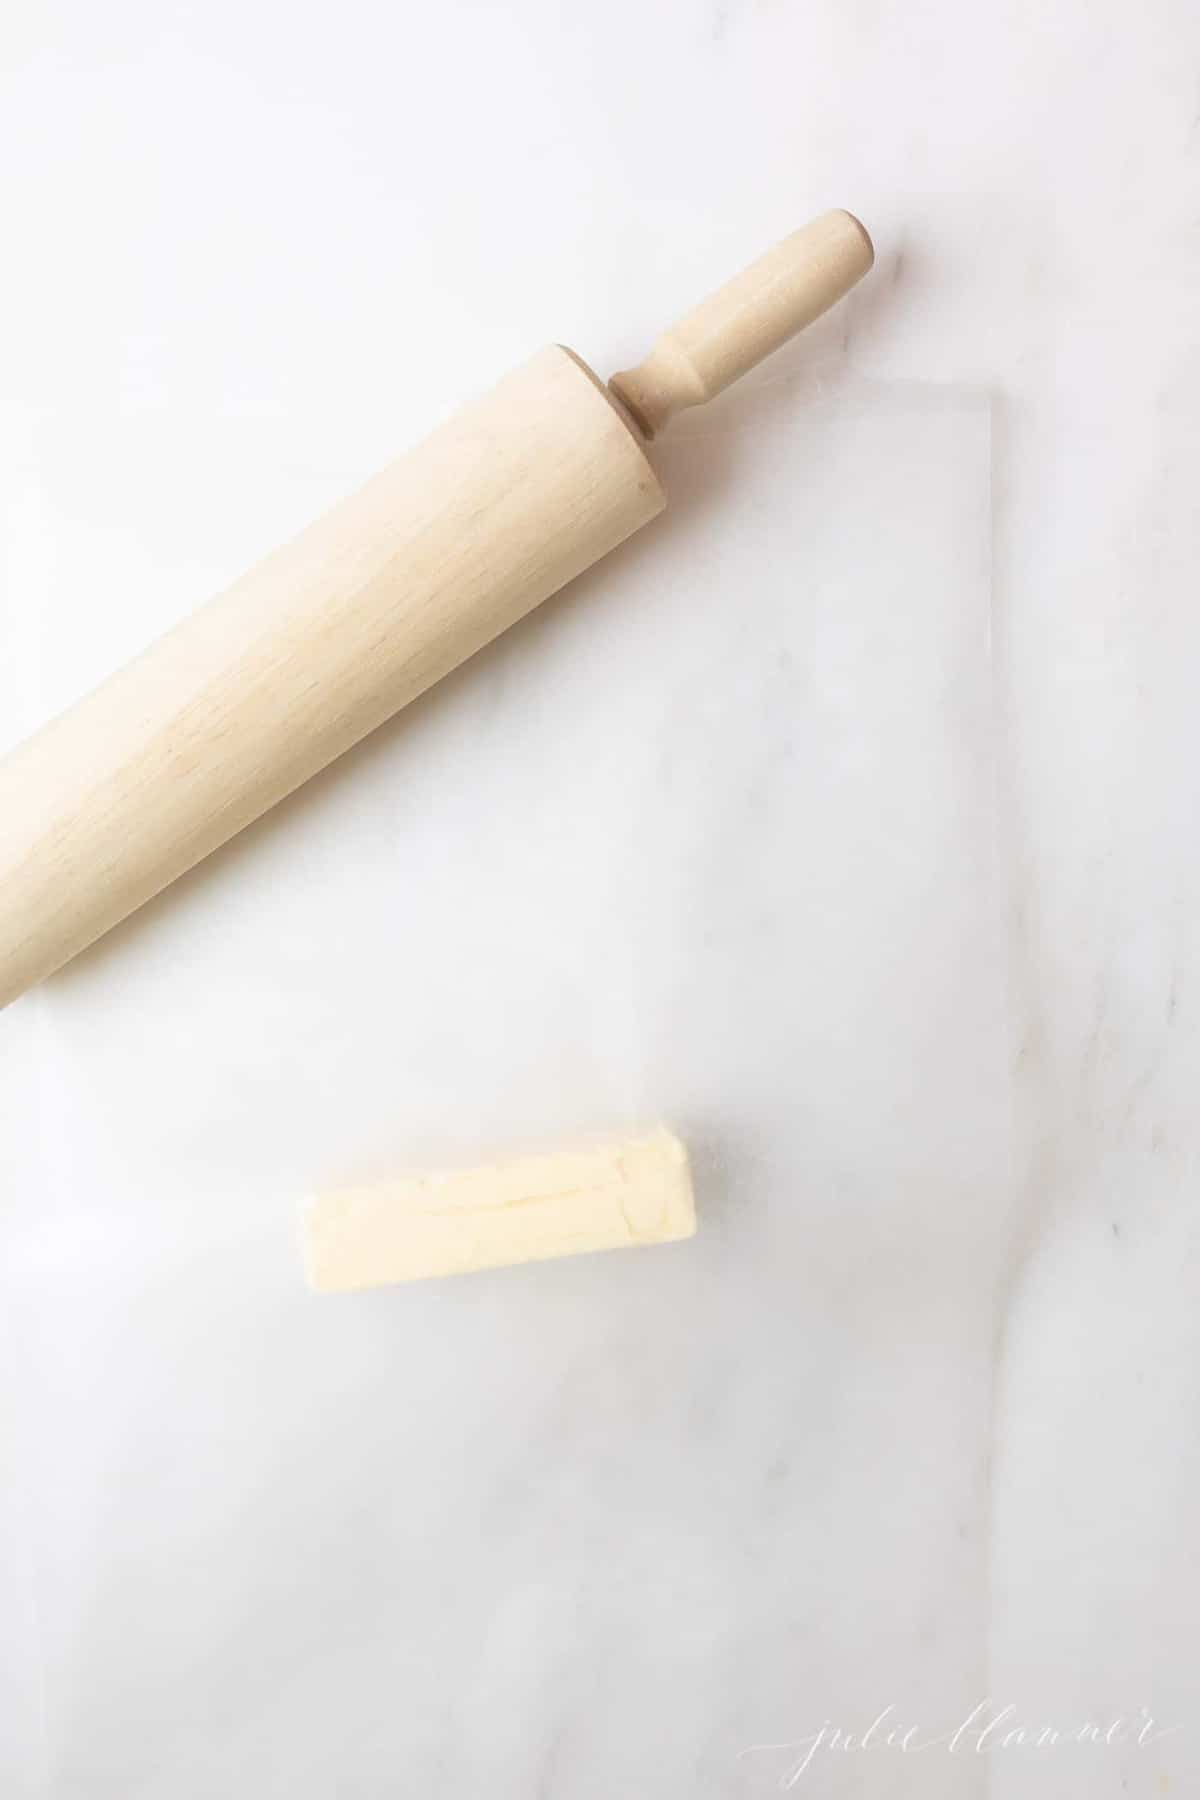 Marble surface, stick of butter and rolling pin.